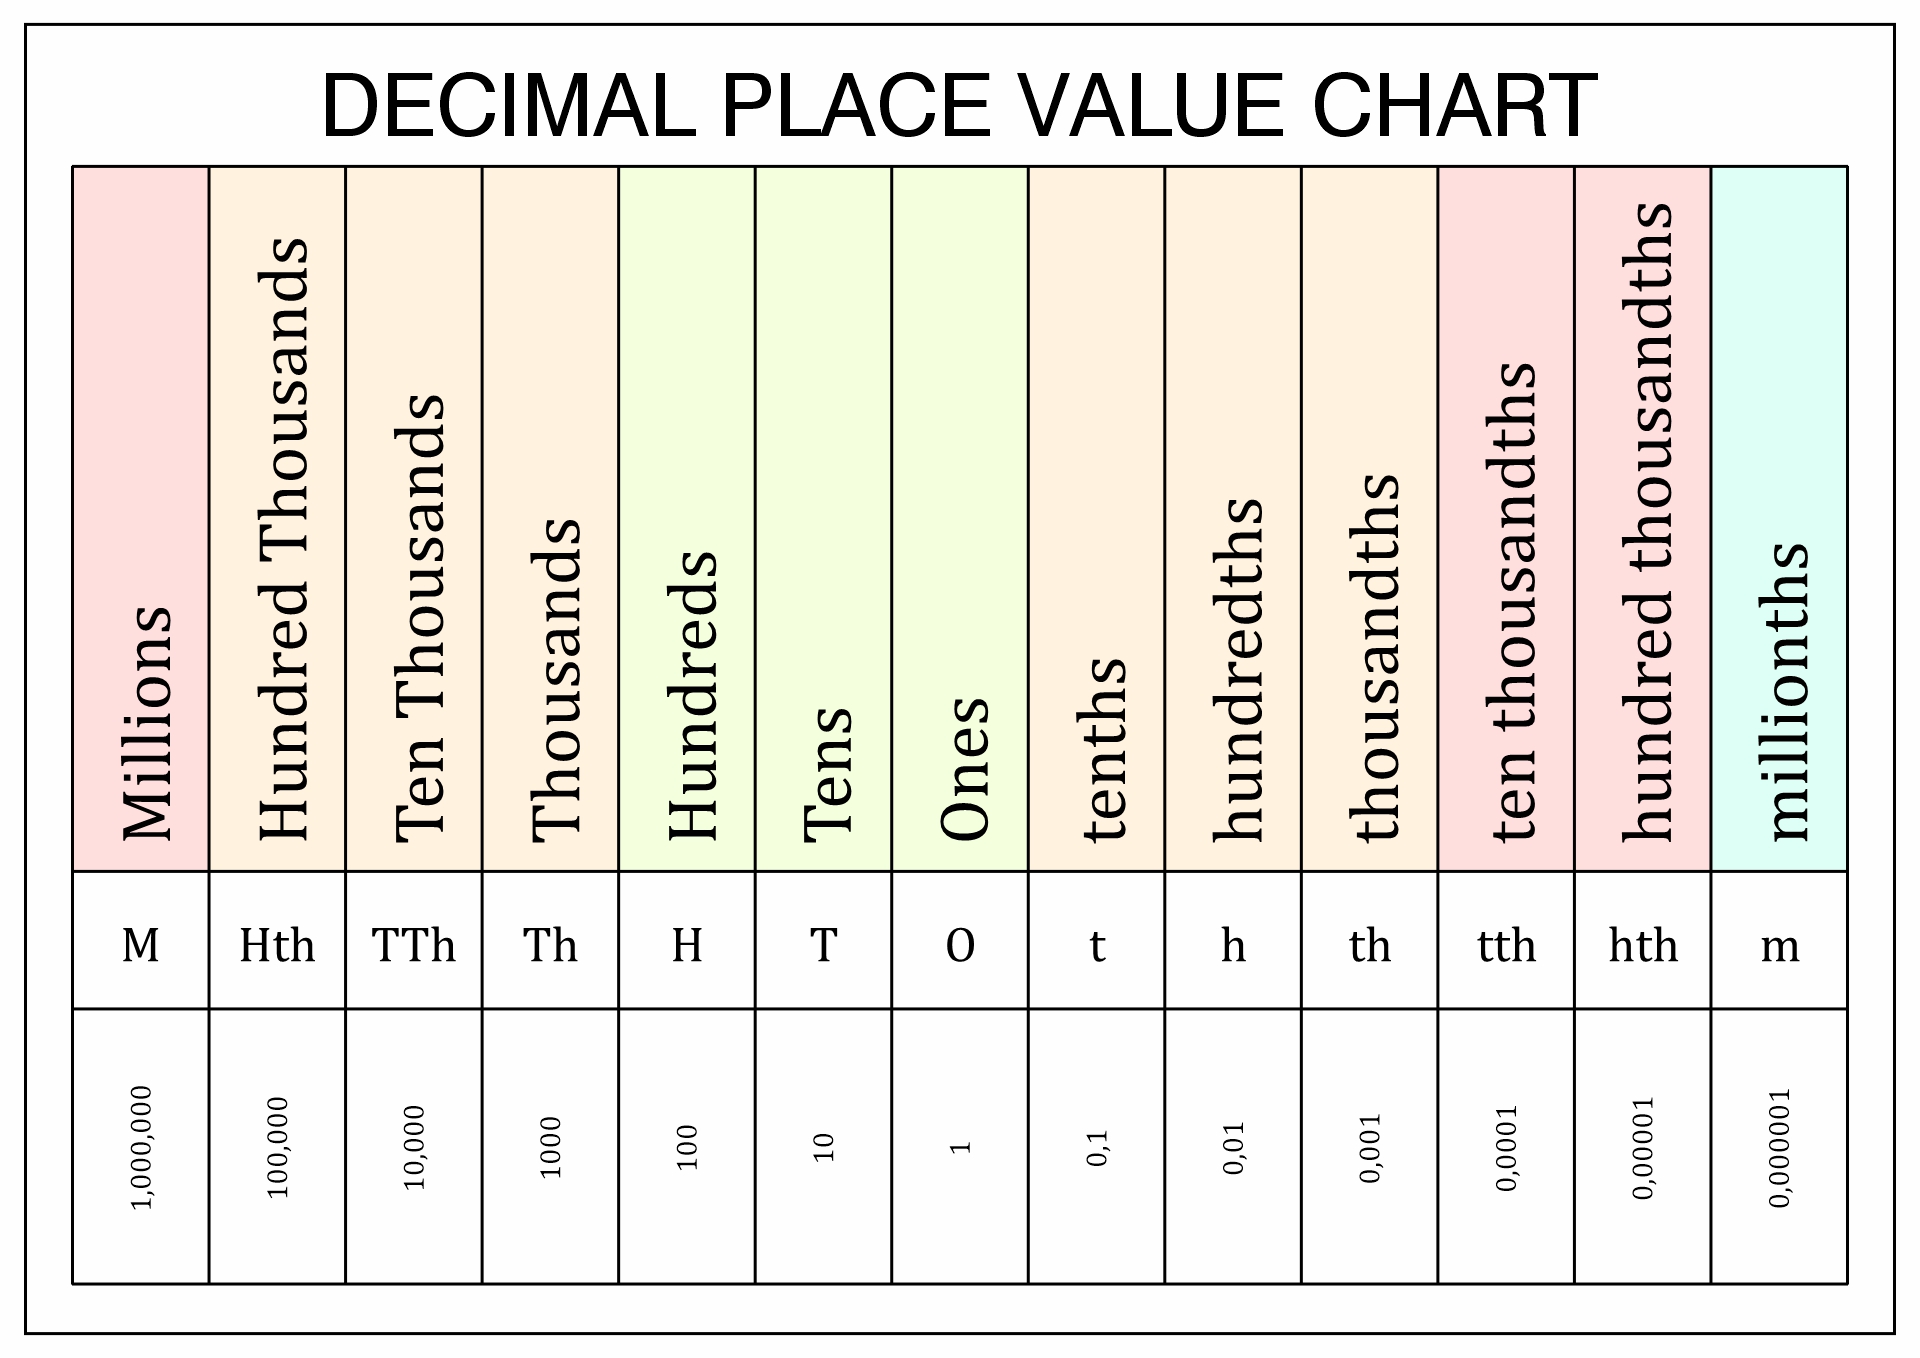 Number Place Value Chart Image